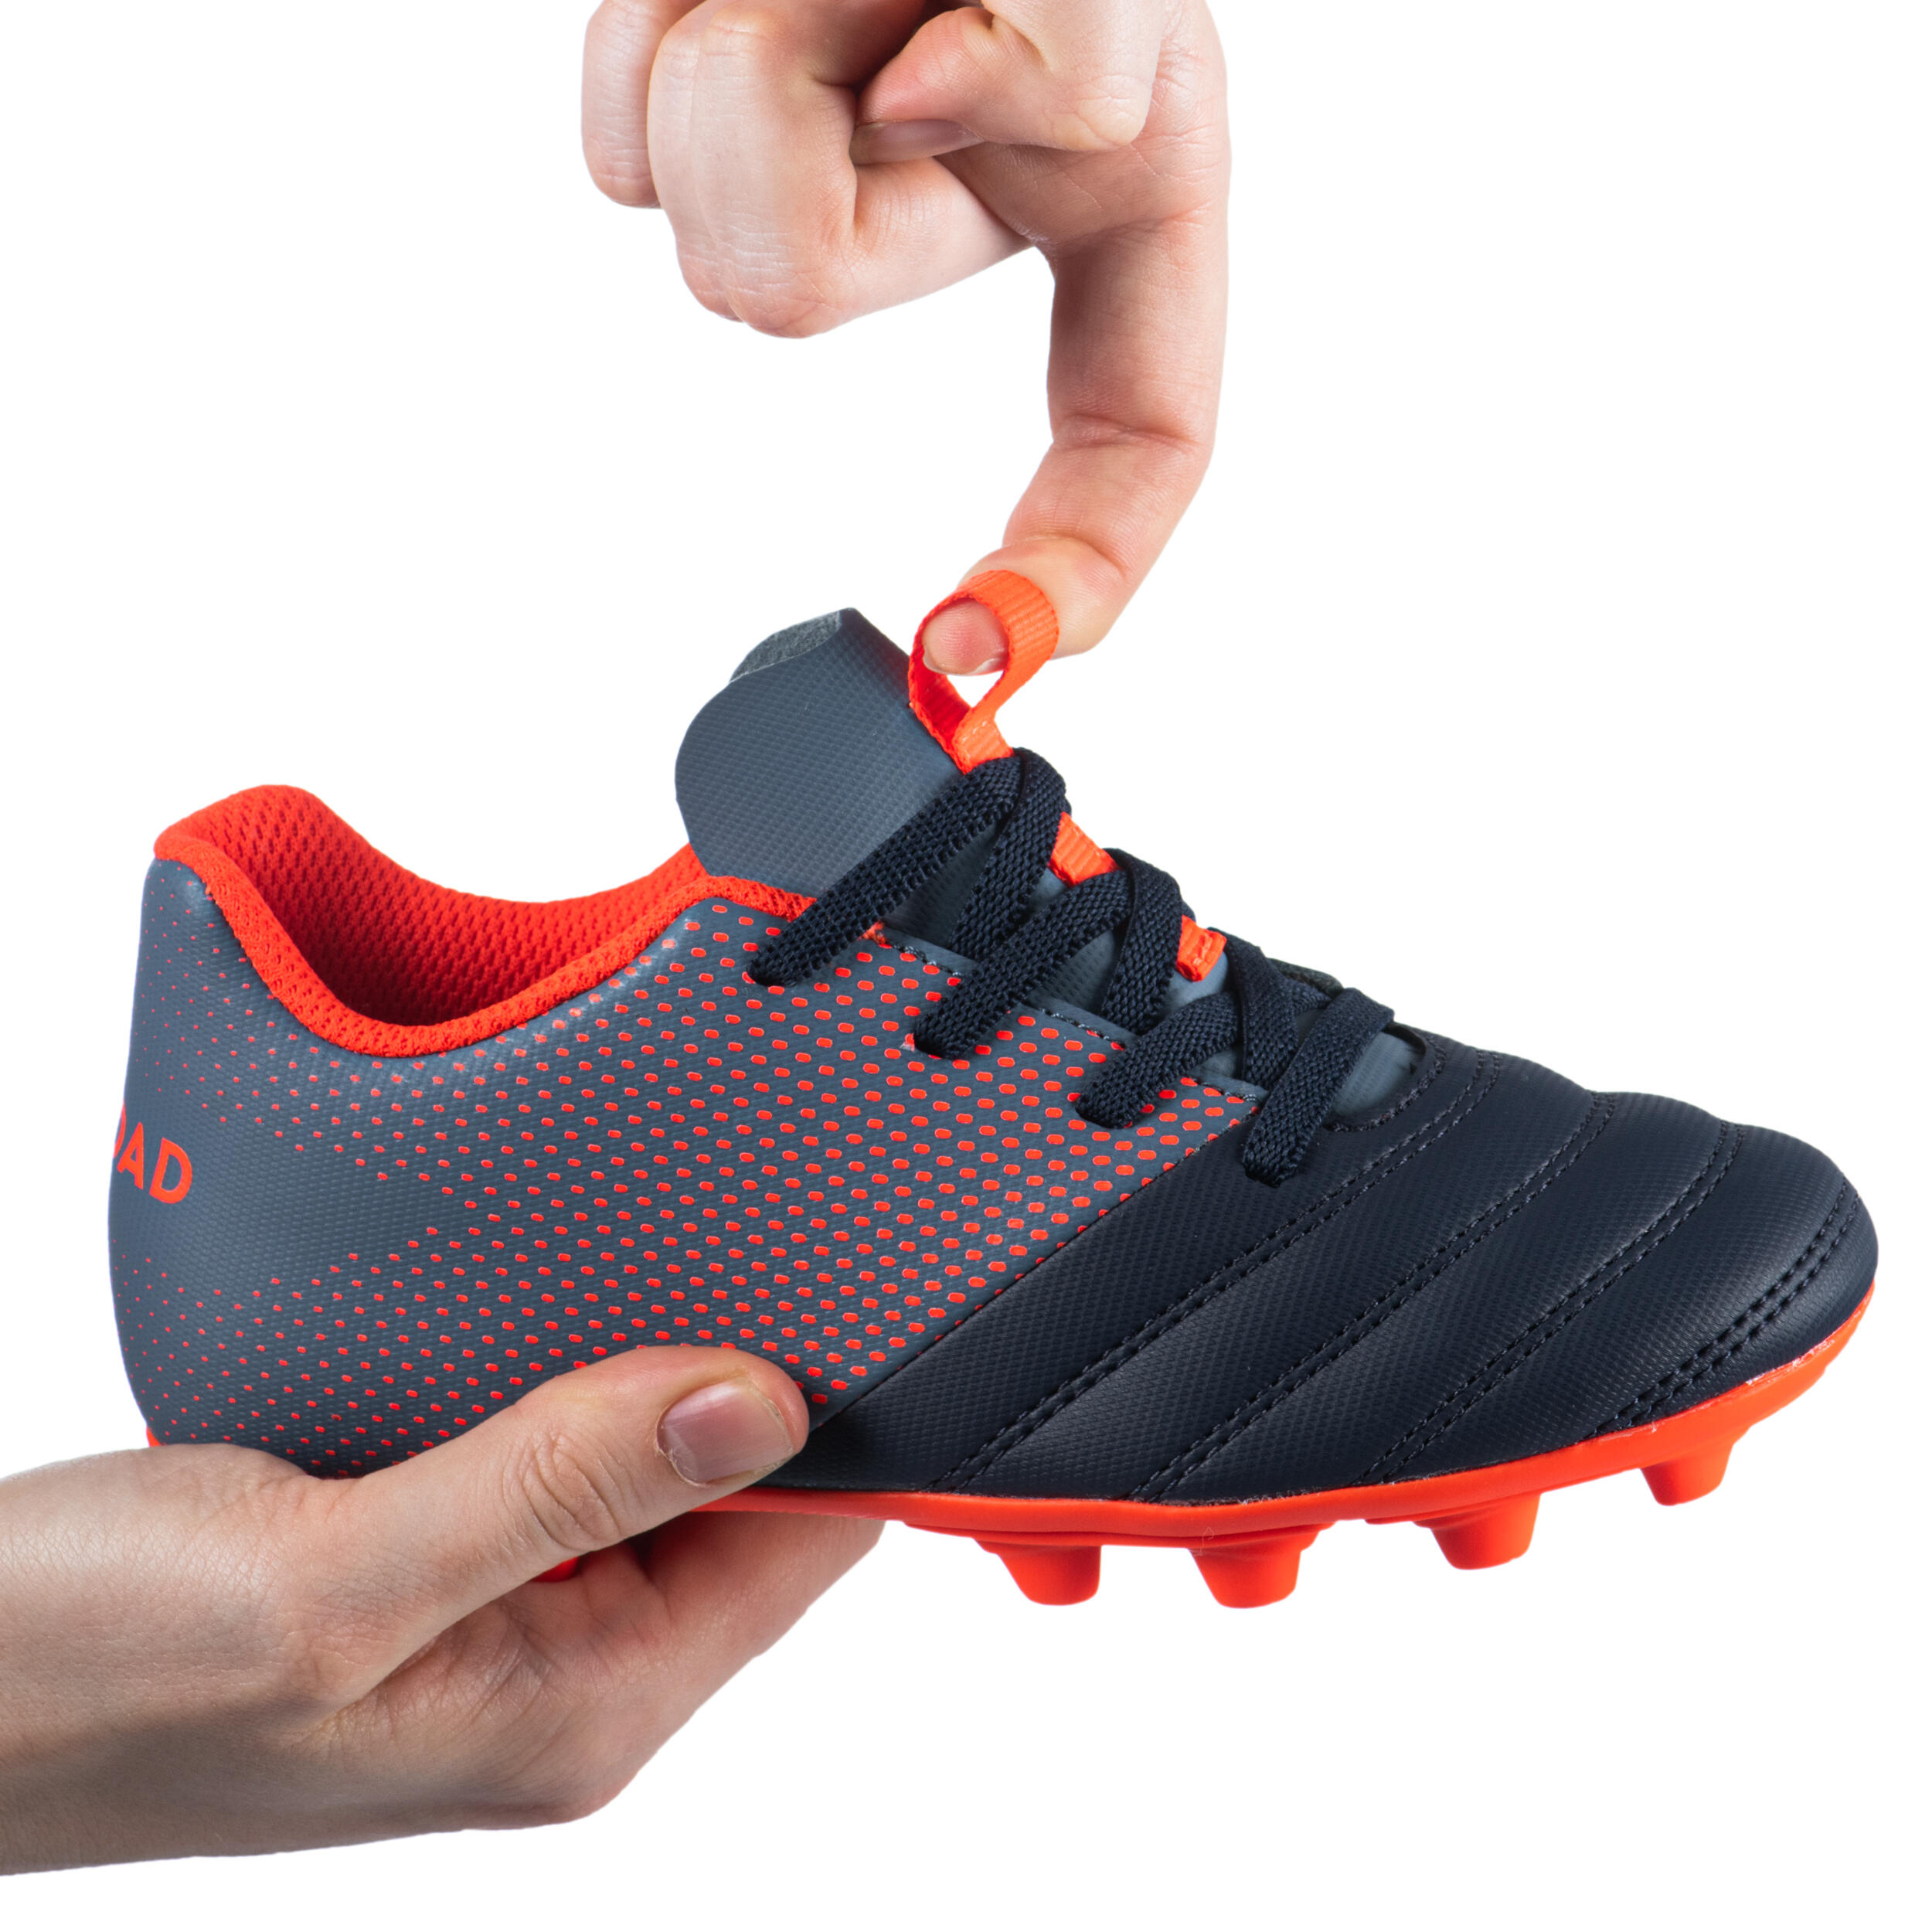 Kids' Easy Lacing Moulded Rugby Boots R100 FG - Red 1/6